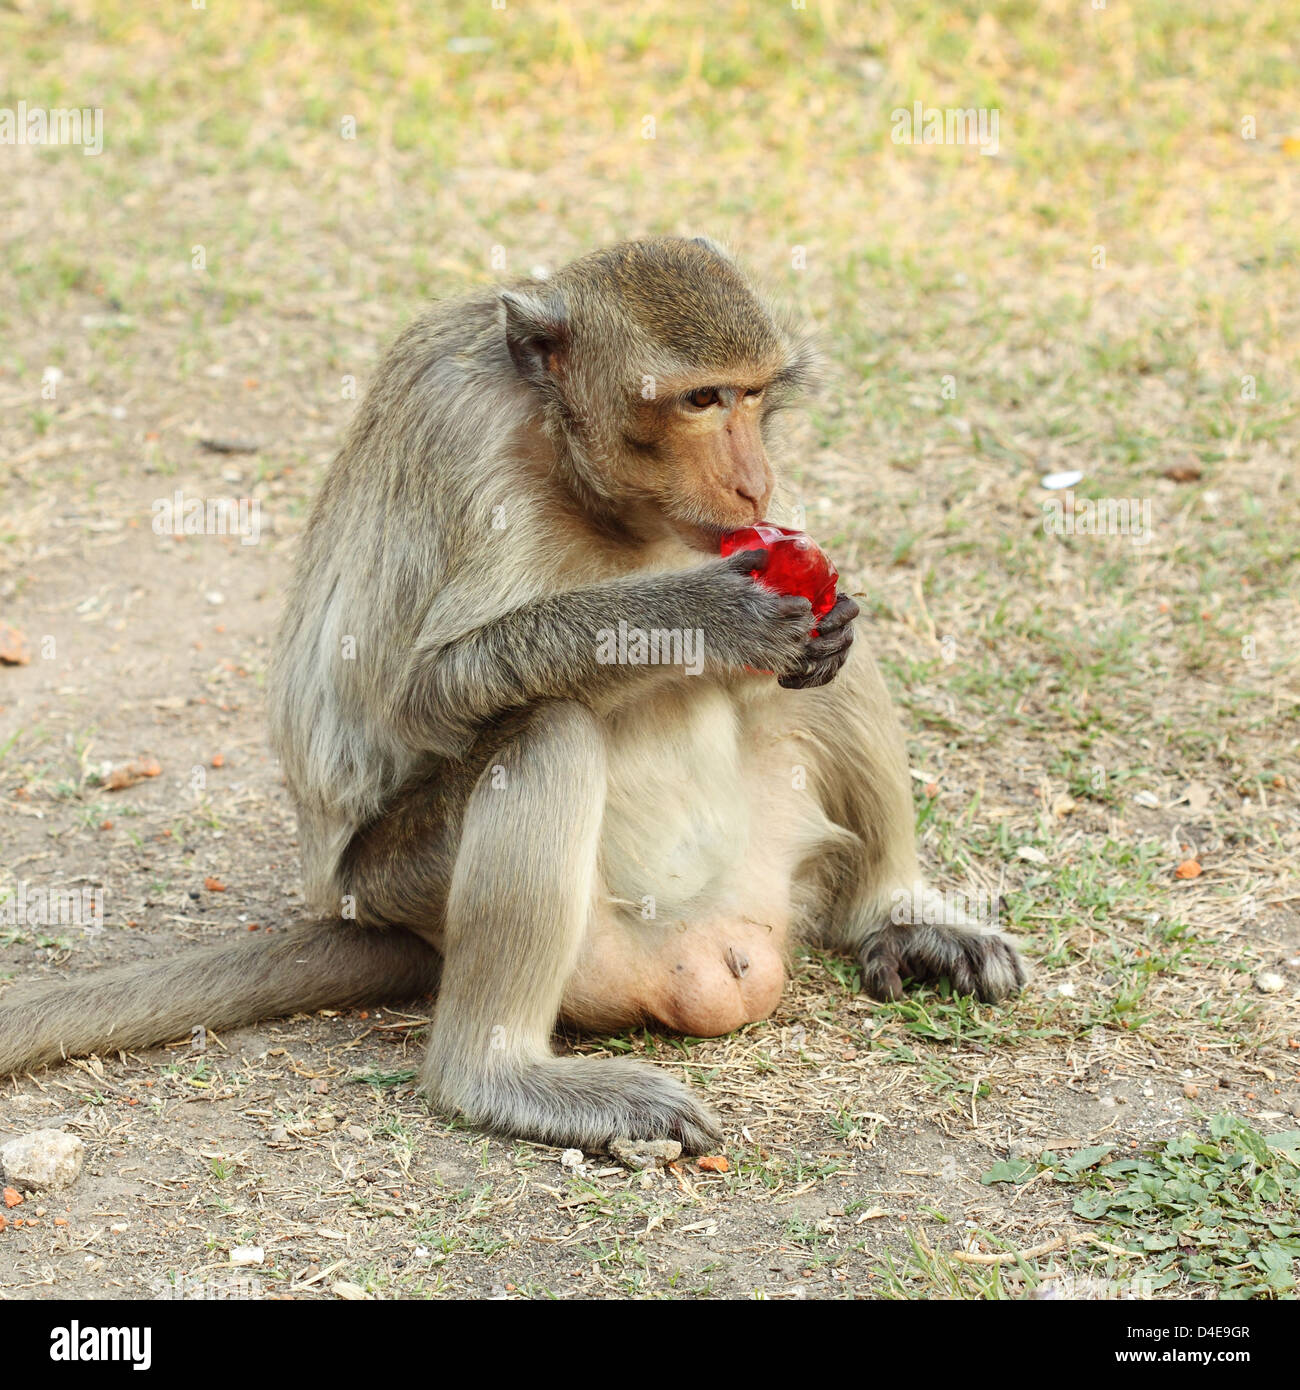 monkey eating a red water Stock Photo